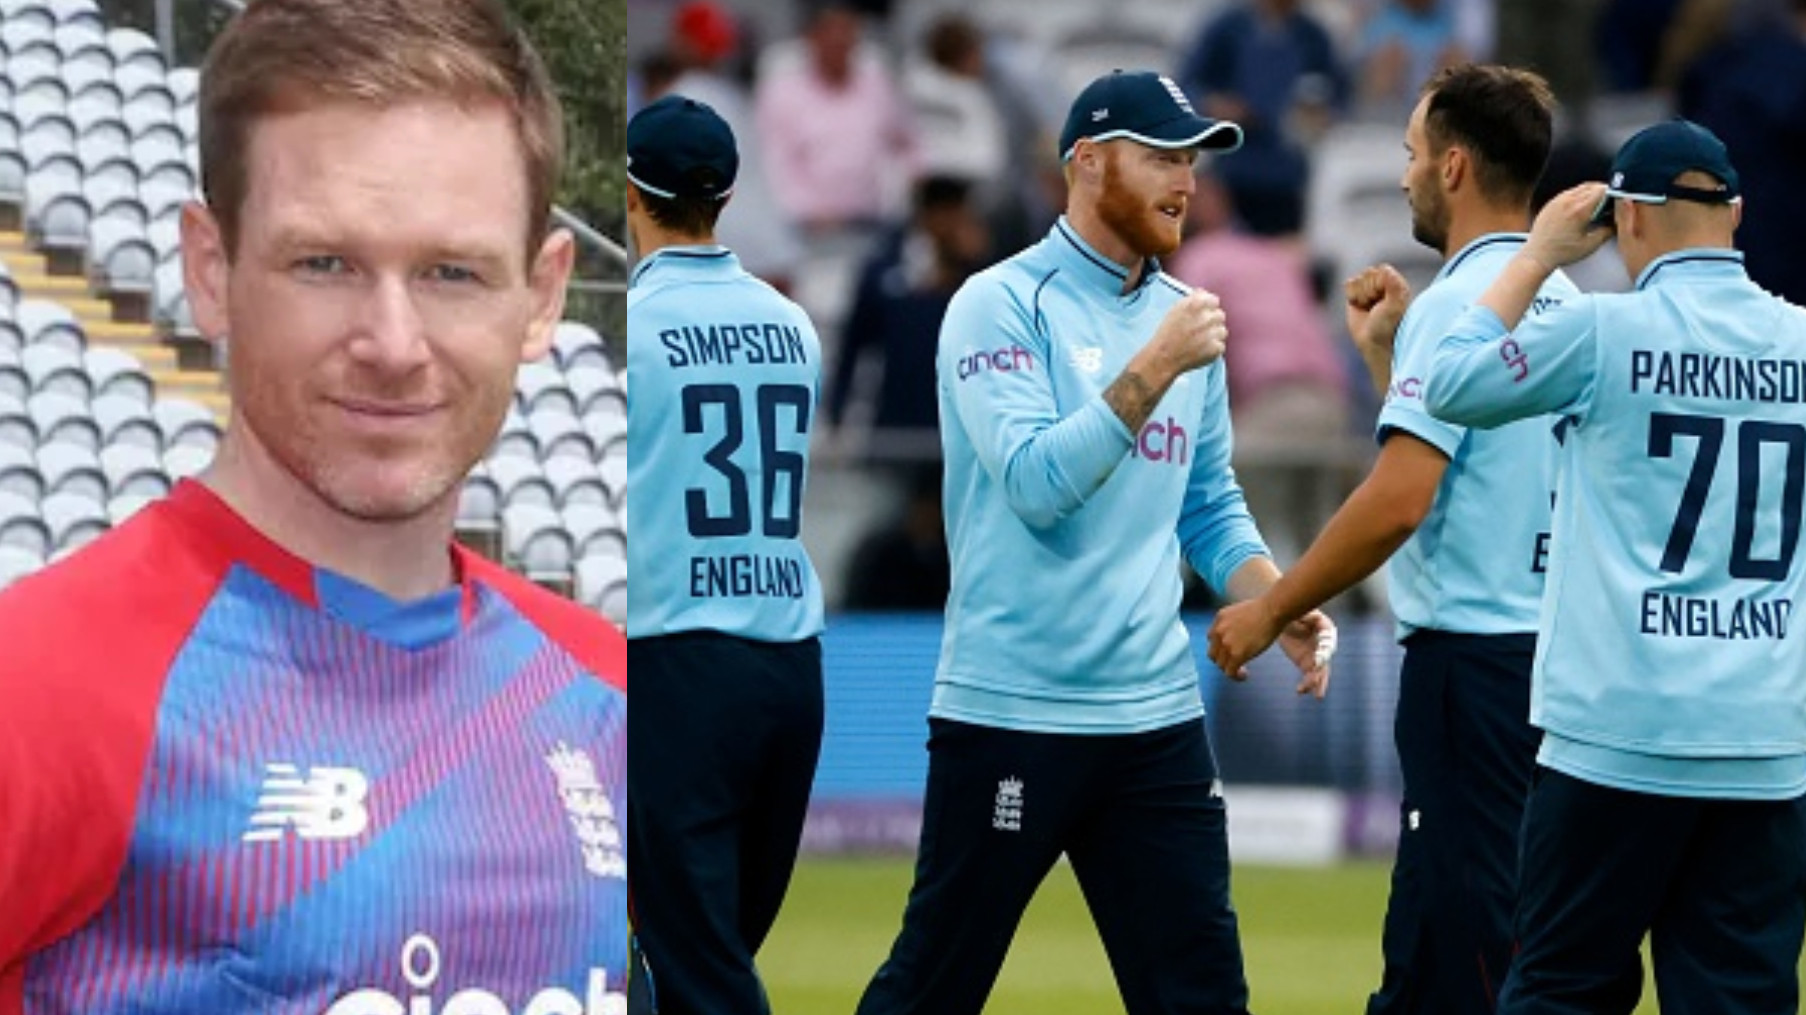 ENG v PAK 2021: Eoin Morgan lauds ‘incredible’ Ben Stokes and England team for beating Pakistan in ODI series